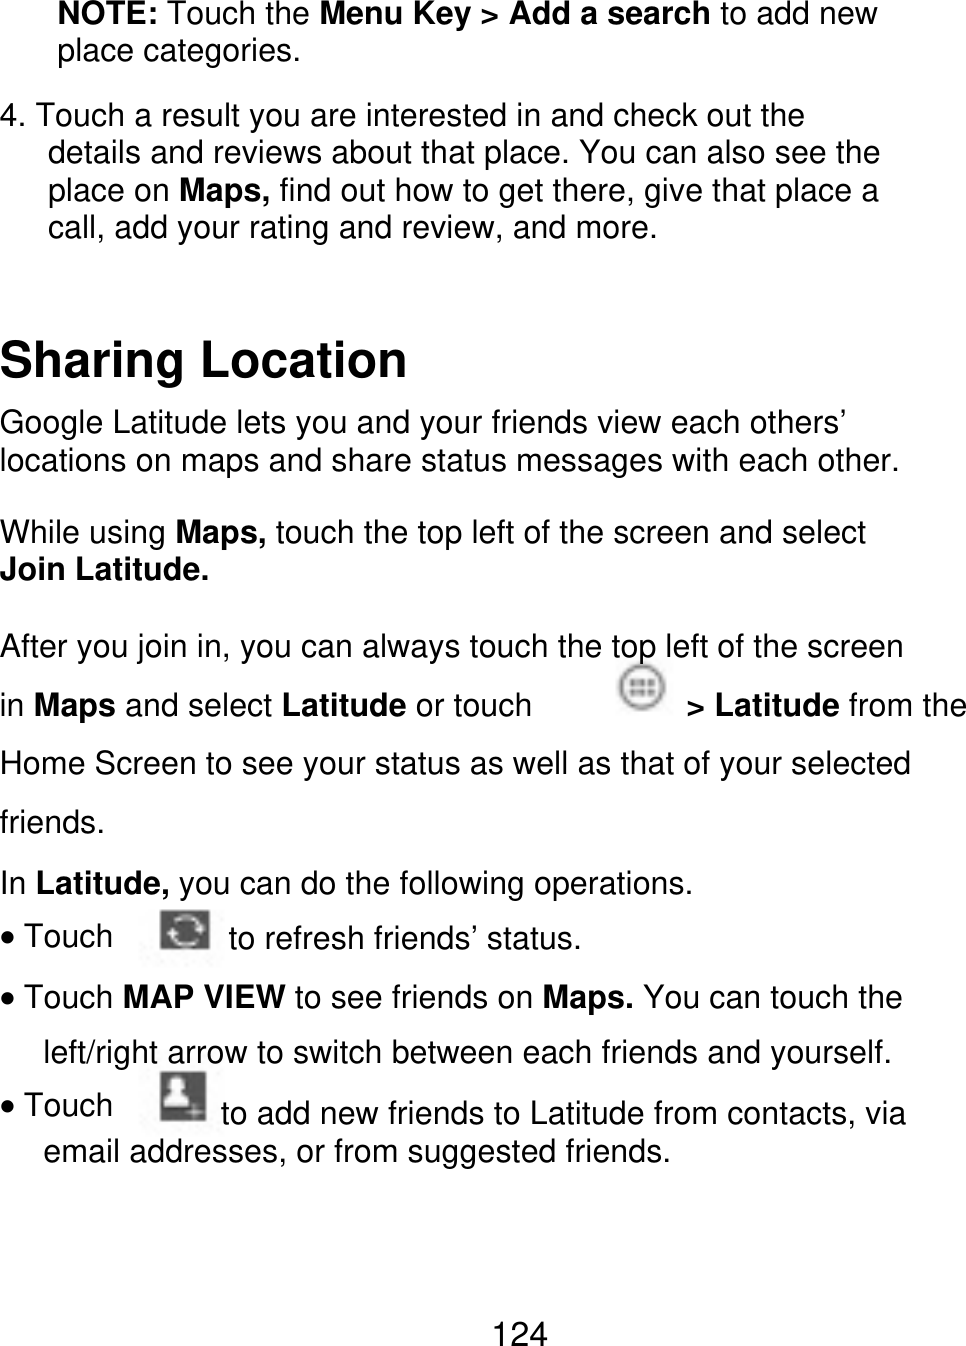 NOTE: Touch the Menu Key &gt; Add a search to add new place categories. 4. Touch a result you are interested in and check out the       details and reviews about that place. You can also see the    place on Maps, find out how to get there, give that place a    call, add your rating and review, and more. Sharing Location Google Latitude lets you and your friends view each others’ locations on maps and share status messages with each other. While using Maps, touch the top left of the screen and select Join Latitude. After you join in, you can always touch the top left of the screen in Maps and select Latitude or touch friends. In Latitude, you can do the following operations. &gt; Latitude from the Home Screen to see your status as well as that of your selected Touch to refresh friends’ status. Touch MAP VIEW to see friends on Maps. You can touch the left/right arrow to switch between each friends and yourself. Touch            to add new friends to Latitude from contacts, via email addresses, or from suggested friends. 124 